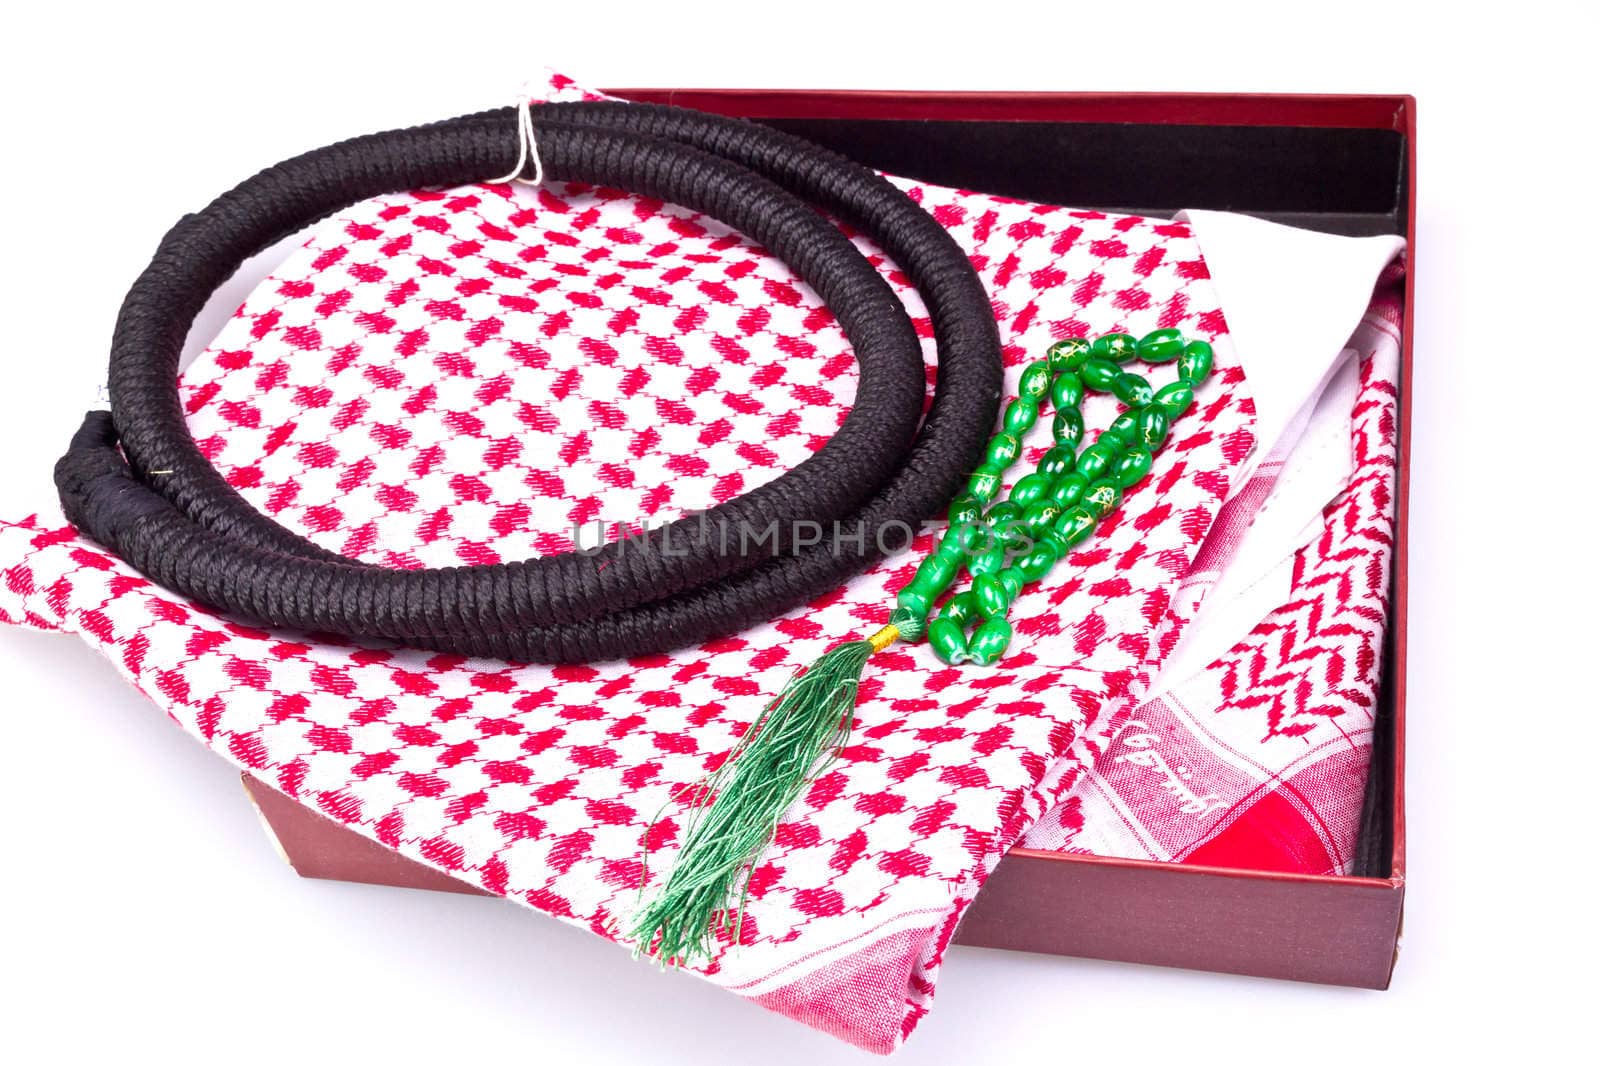 folded muslim hear gear with rosary bead in gift box on white surface